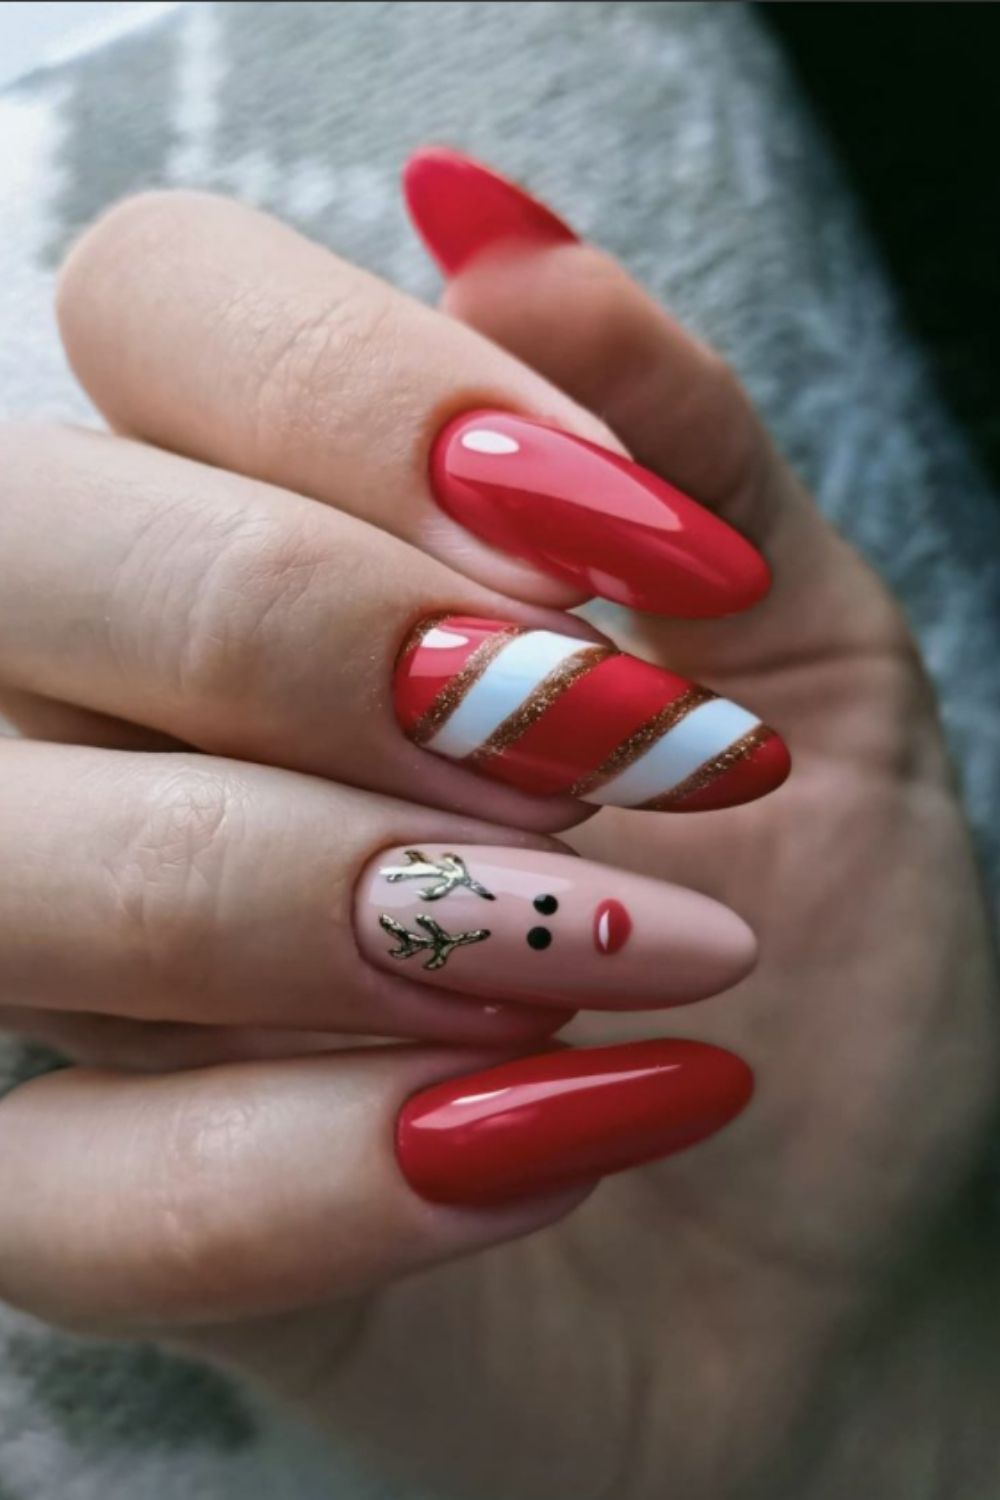 Gold and red almond nails designs